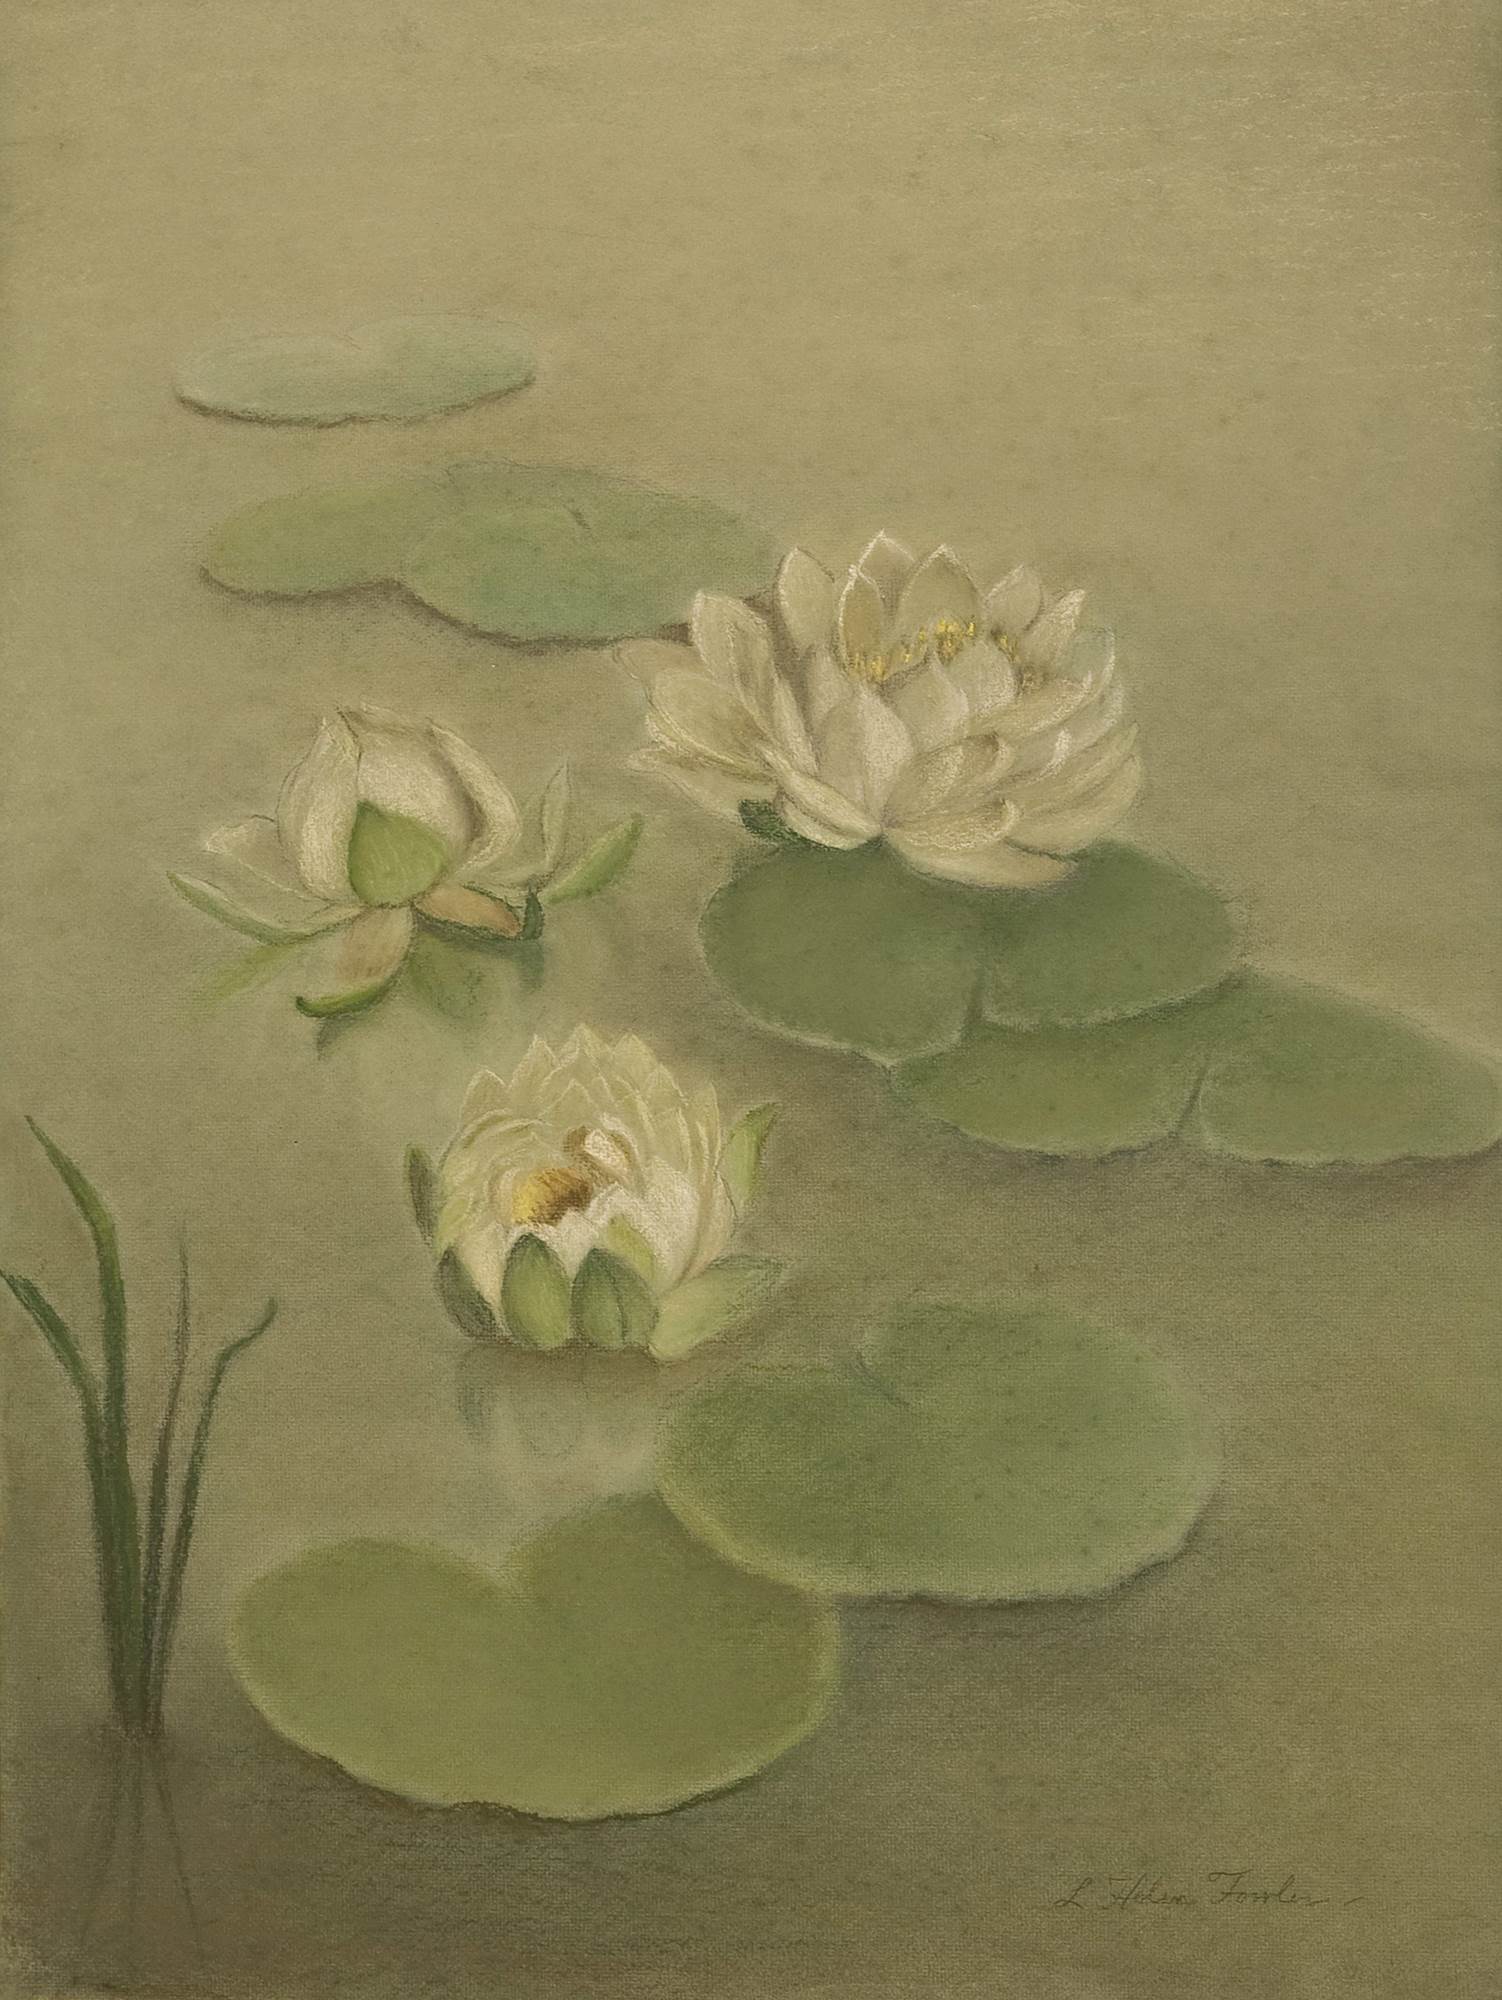 Three Water Lilies Floating on Pond